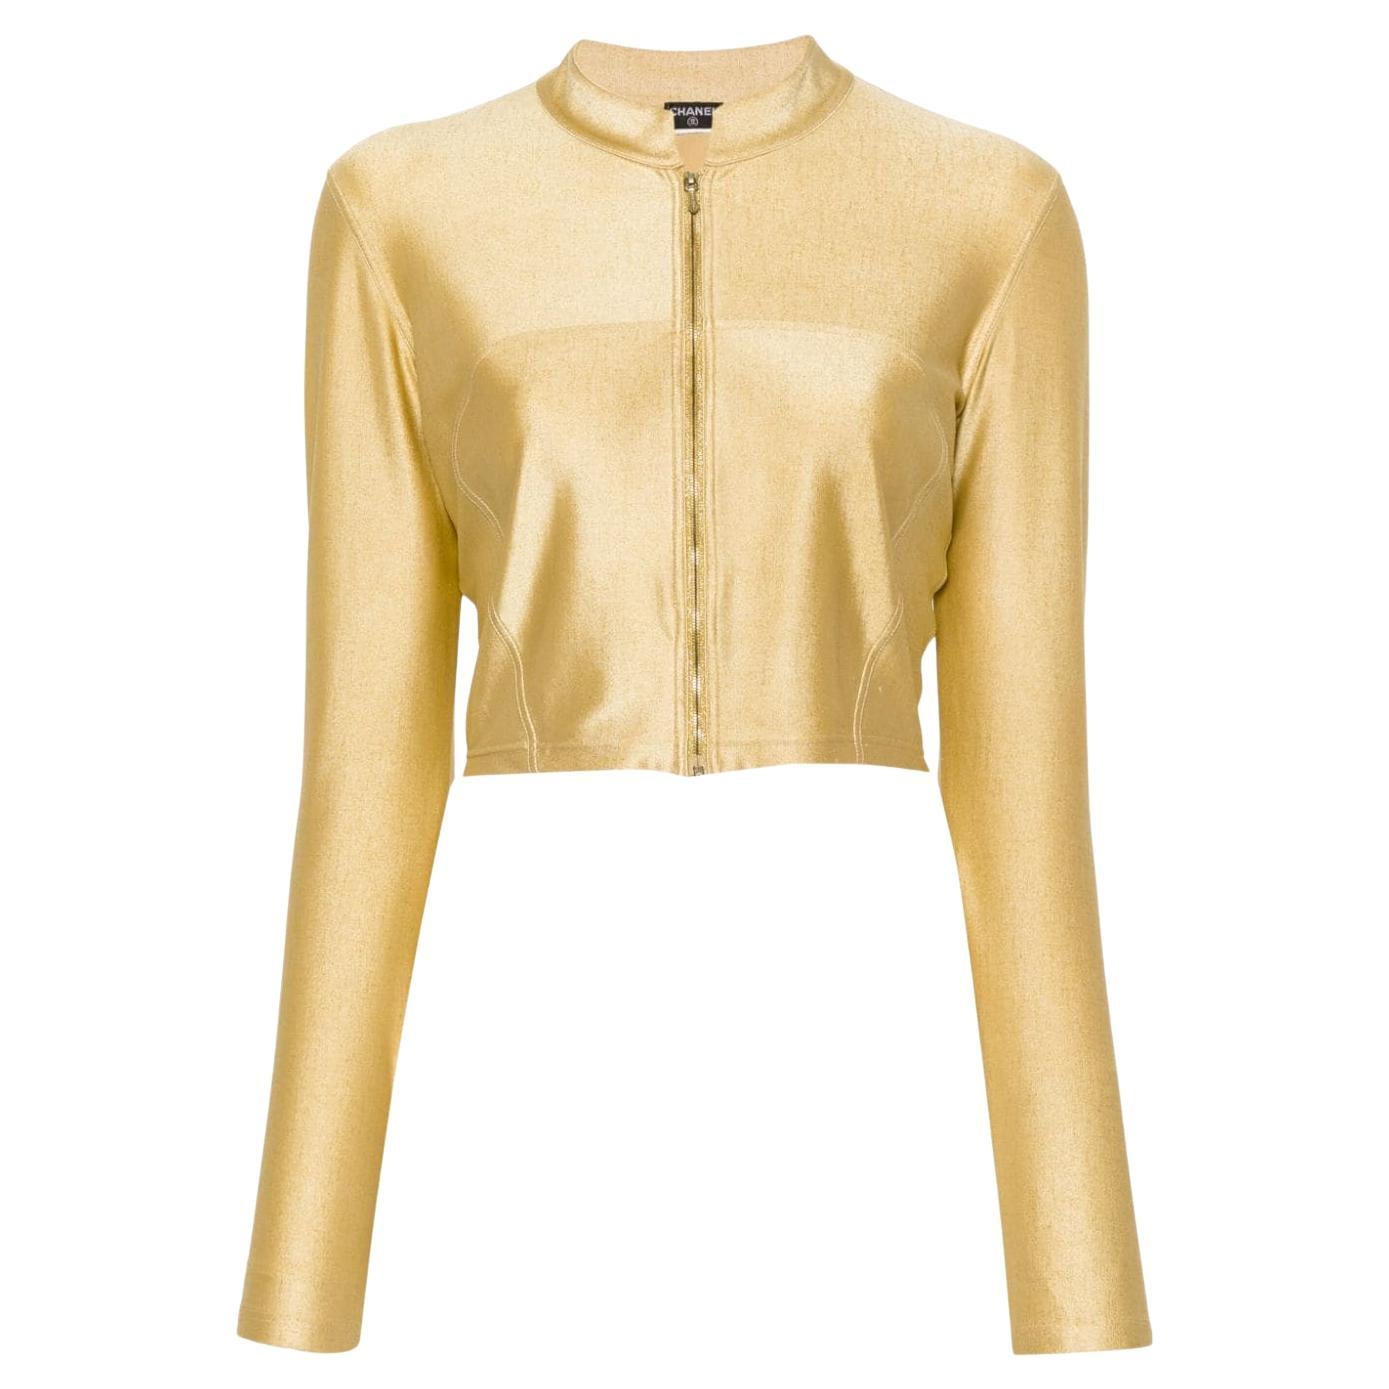  Chanel Gold-Tone Metallic Cropped Jacket For Sale